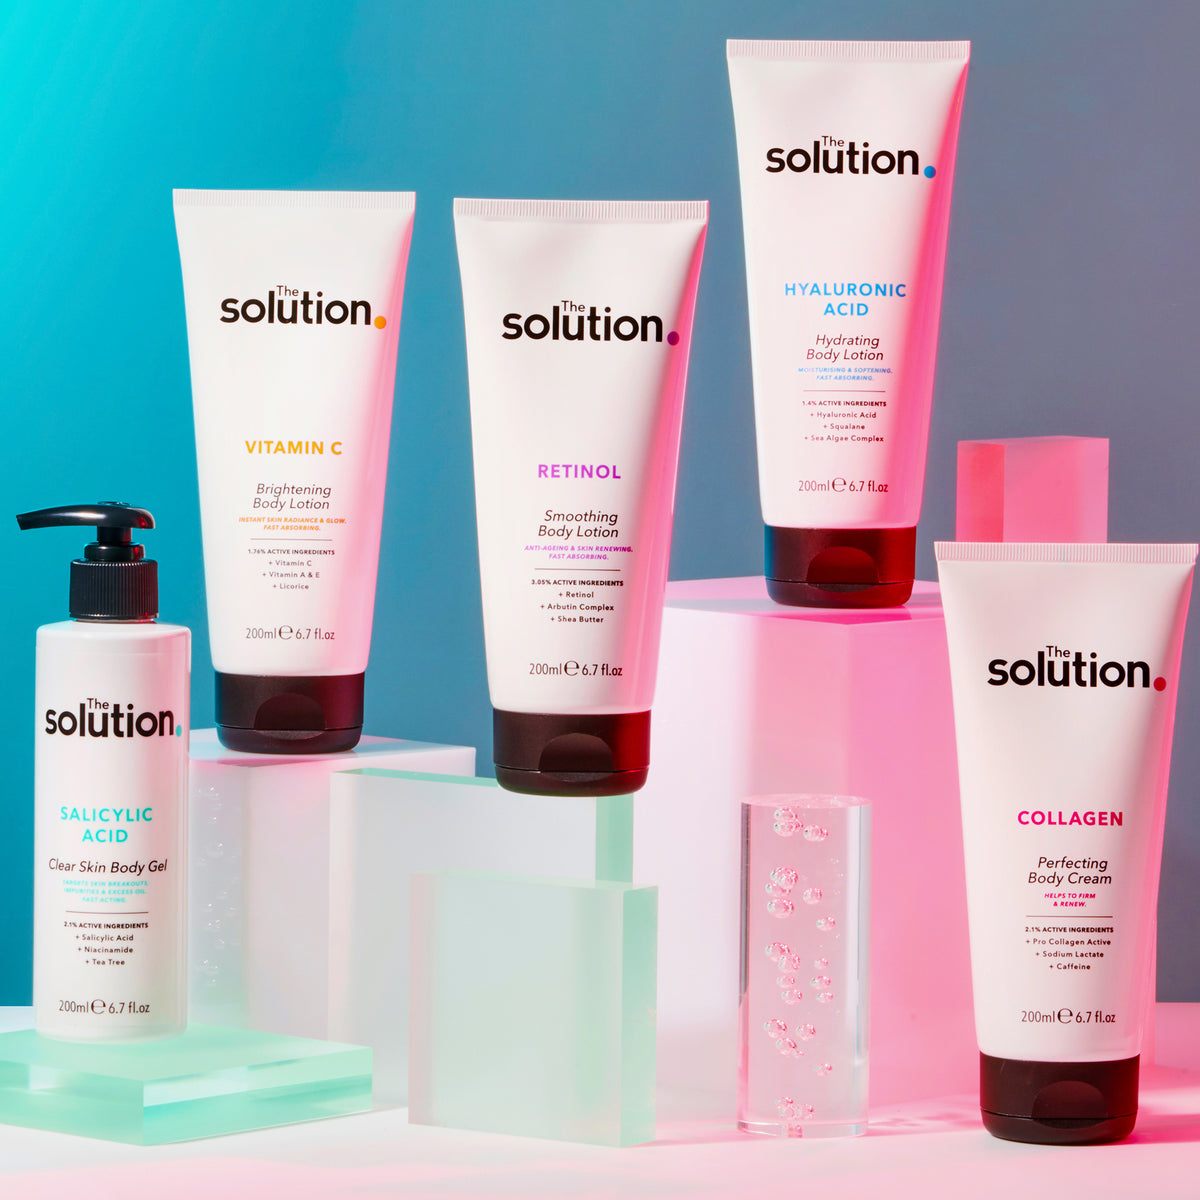 The Solution | Retinol Smoothing Body Lotion